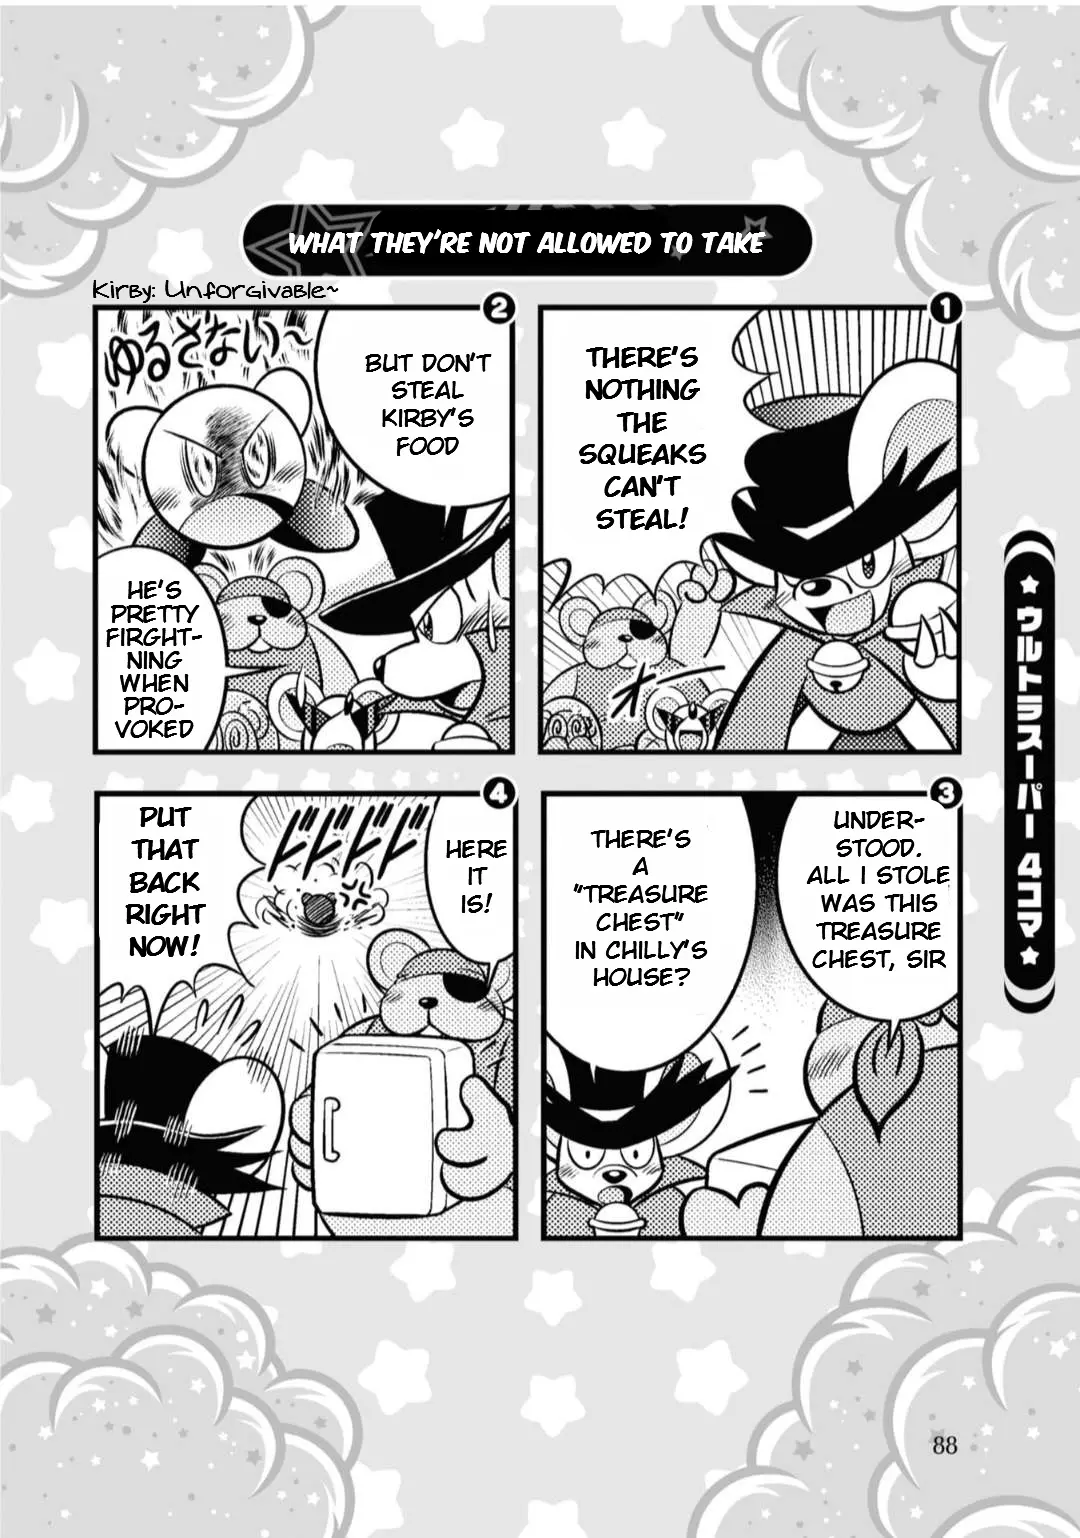 Kirby Of The Stars - Ultra Super Pupupu Hero: Here Comes The Pupupu Land Hero! - 13 page 16-83d1d585